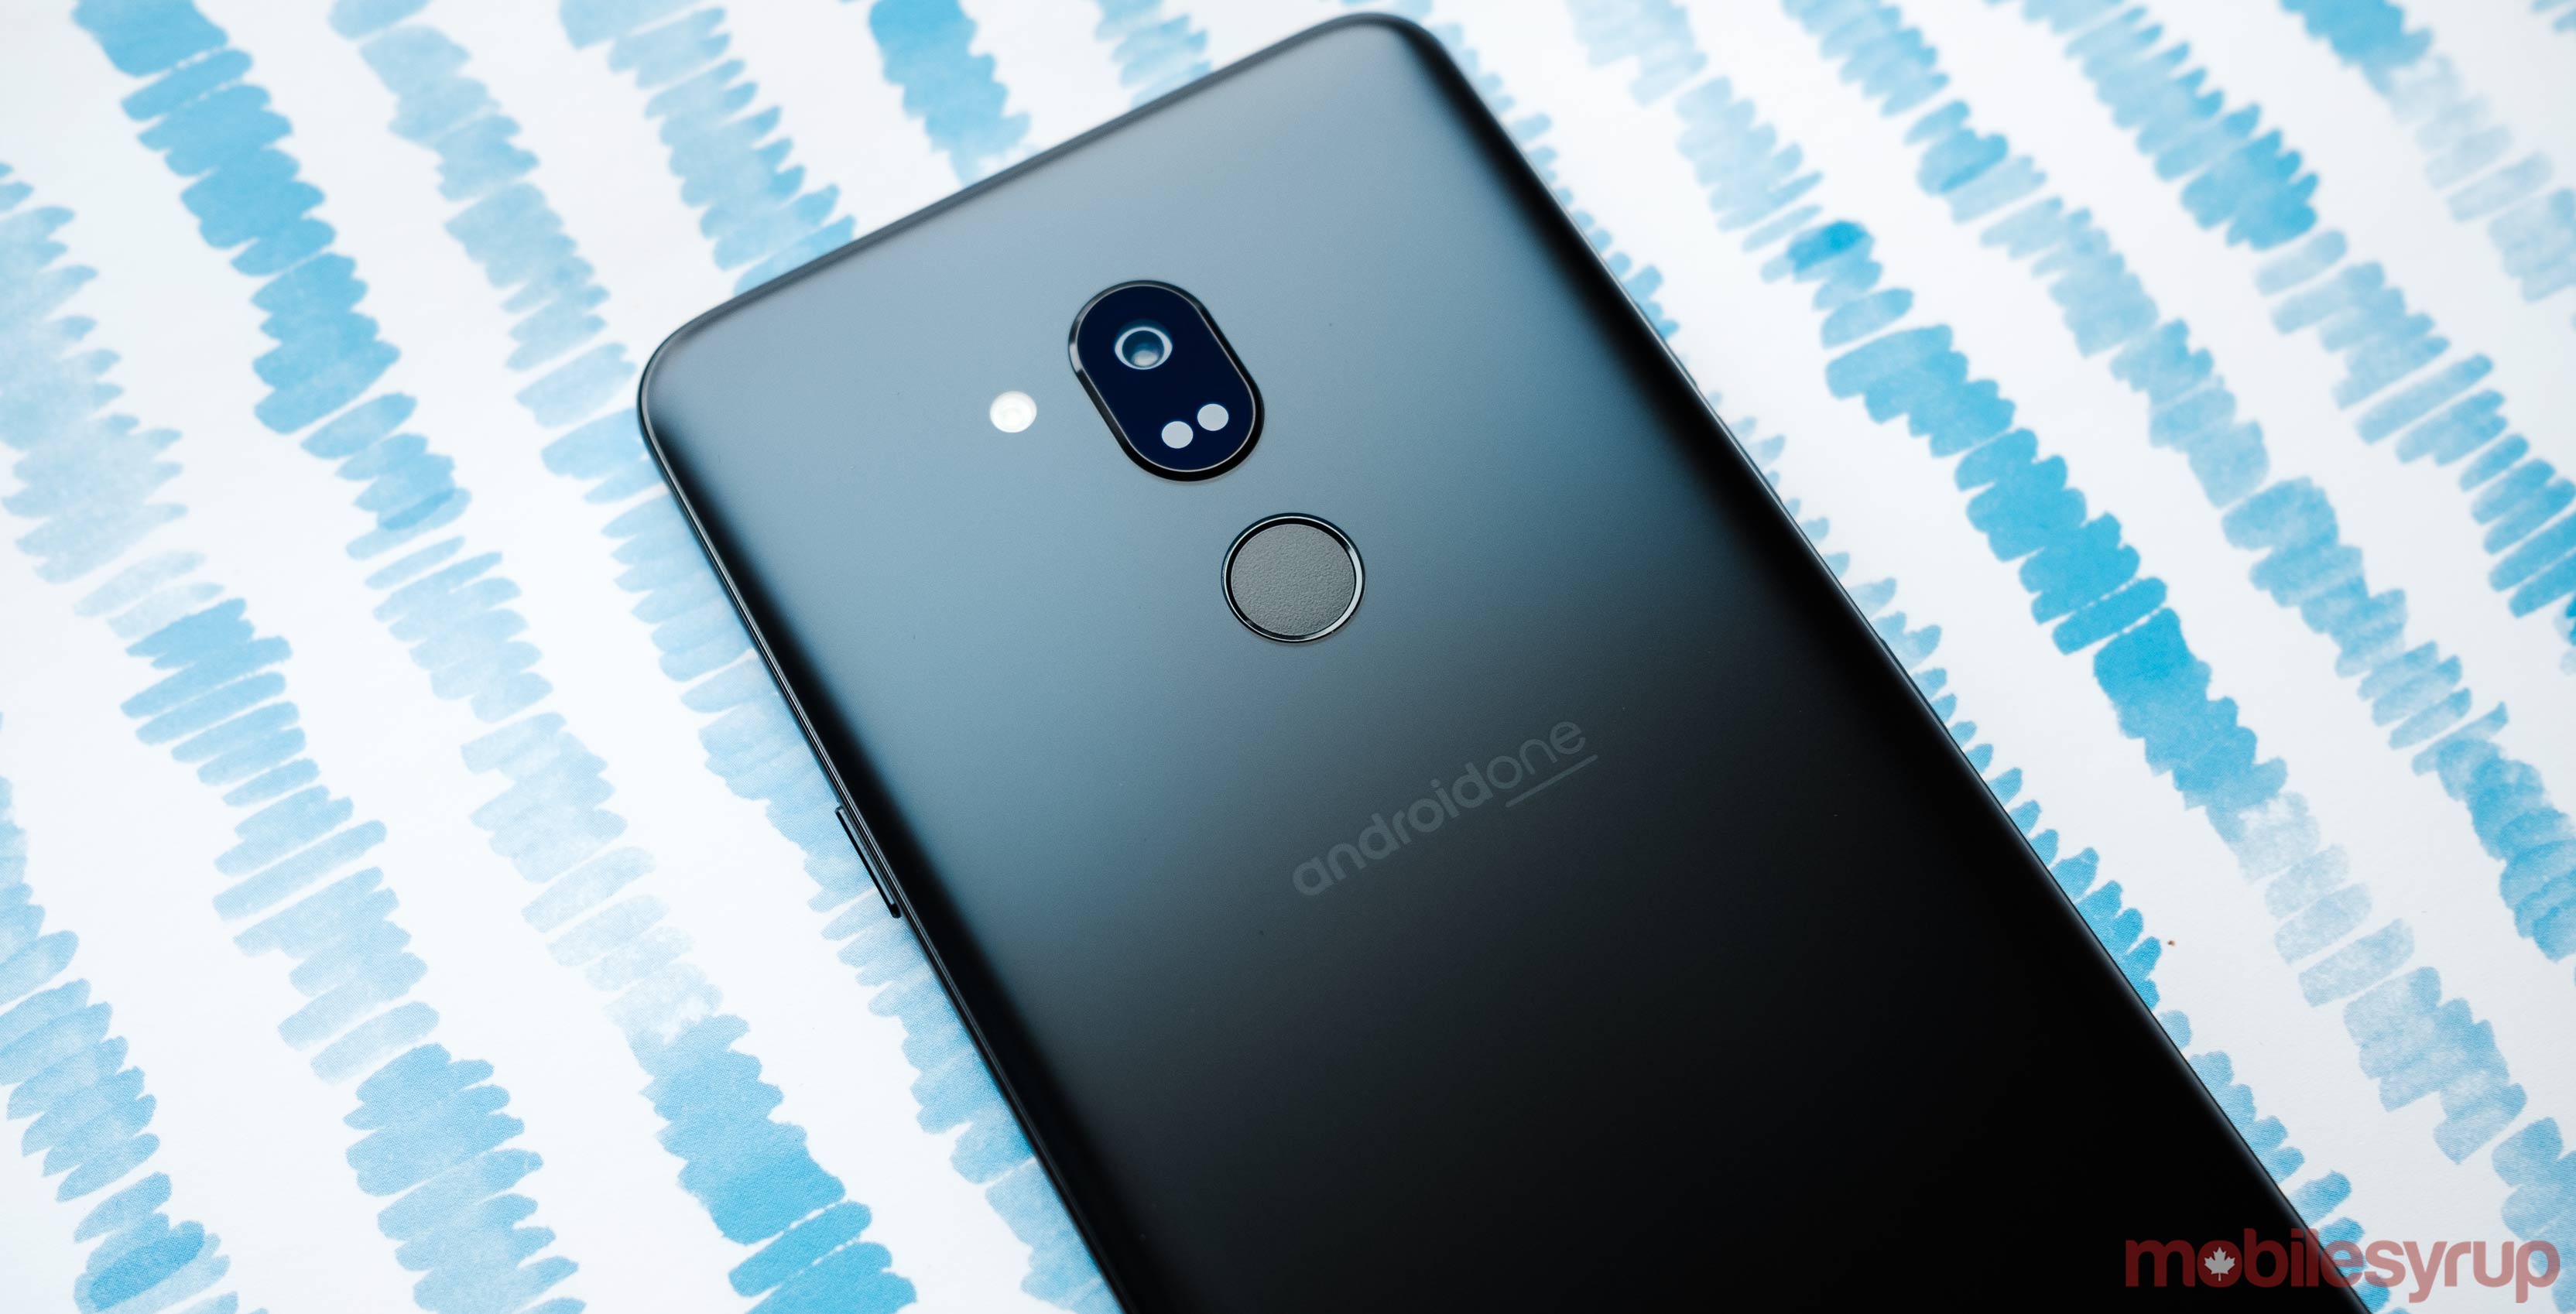 The LG G7 One is among the first Android One devices to come to Canada